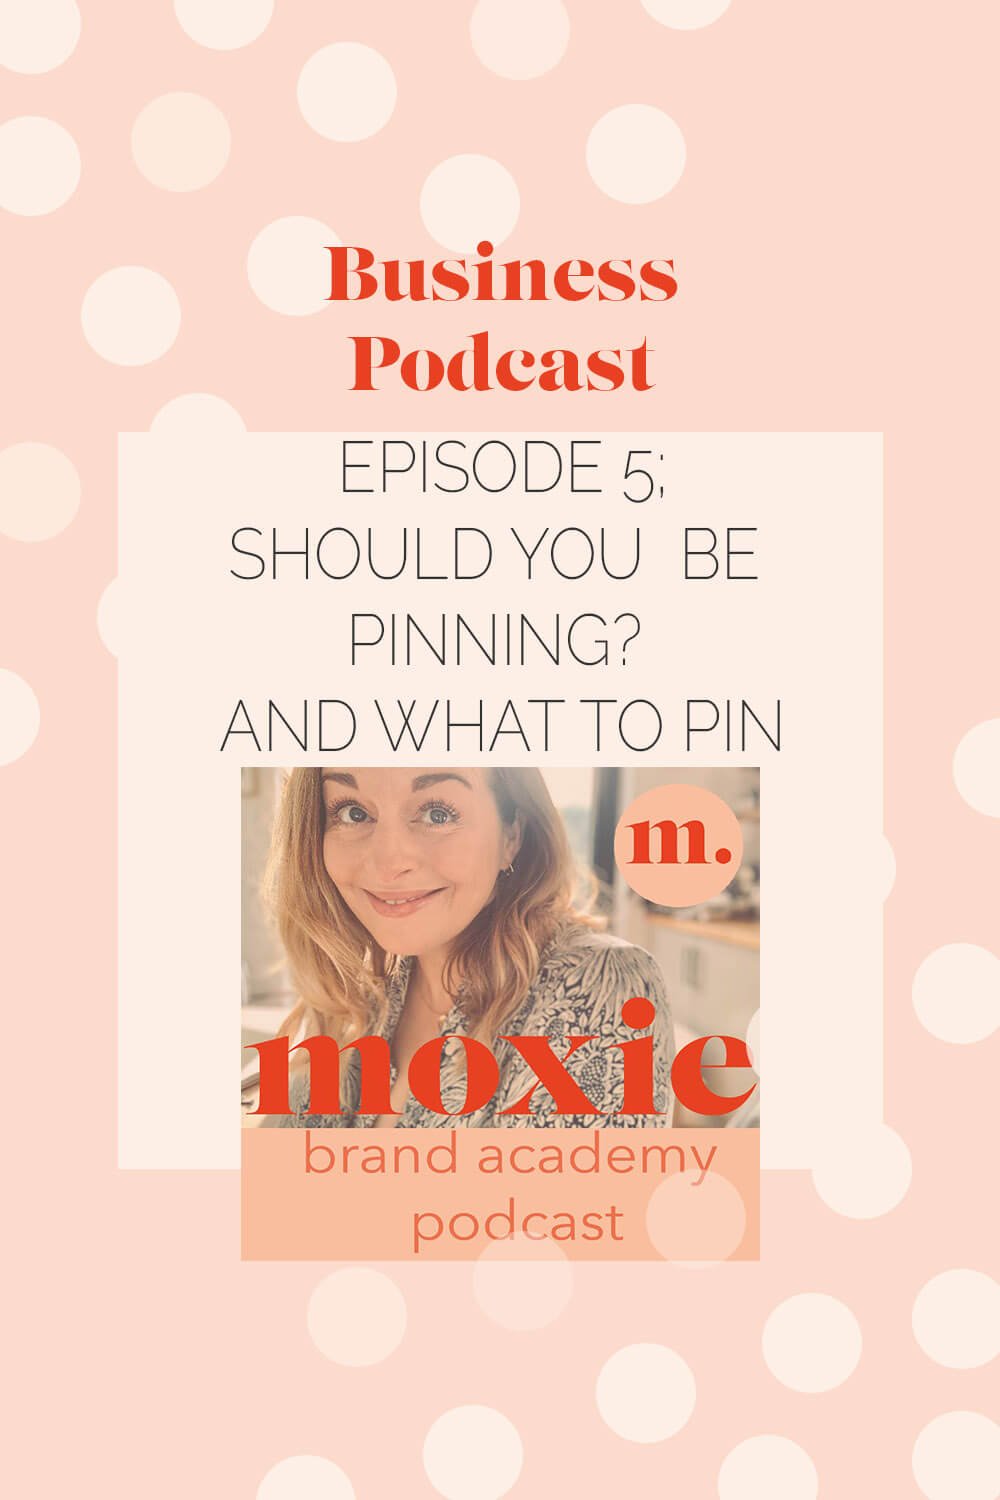 Should You Be Pinning? And What To Pin